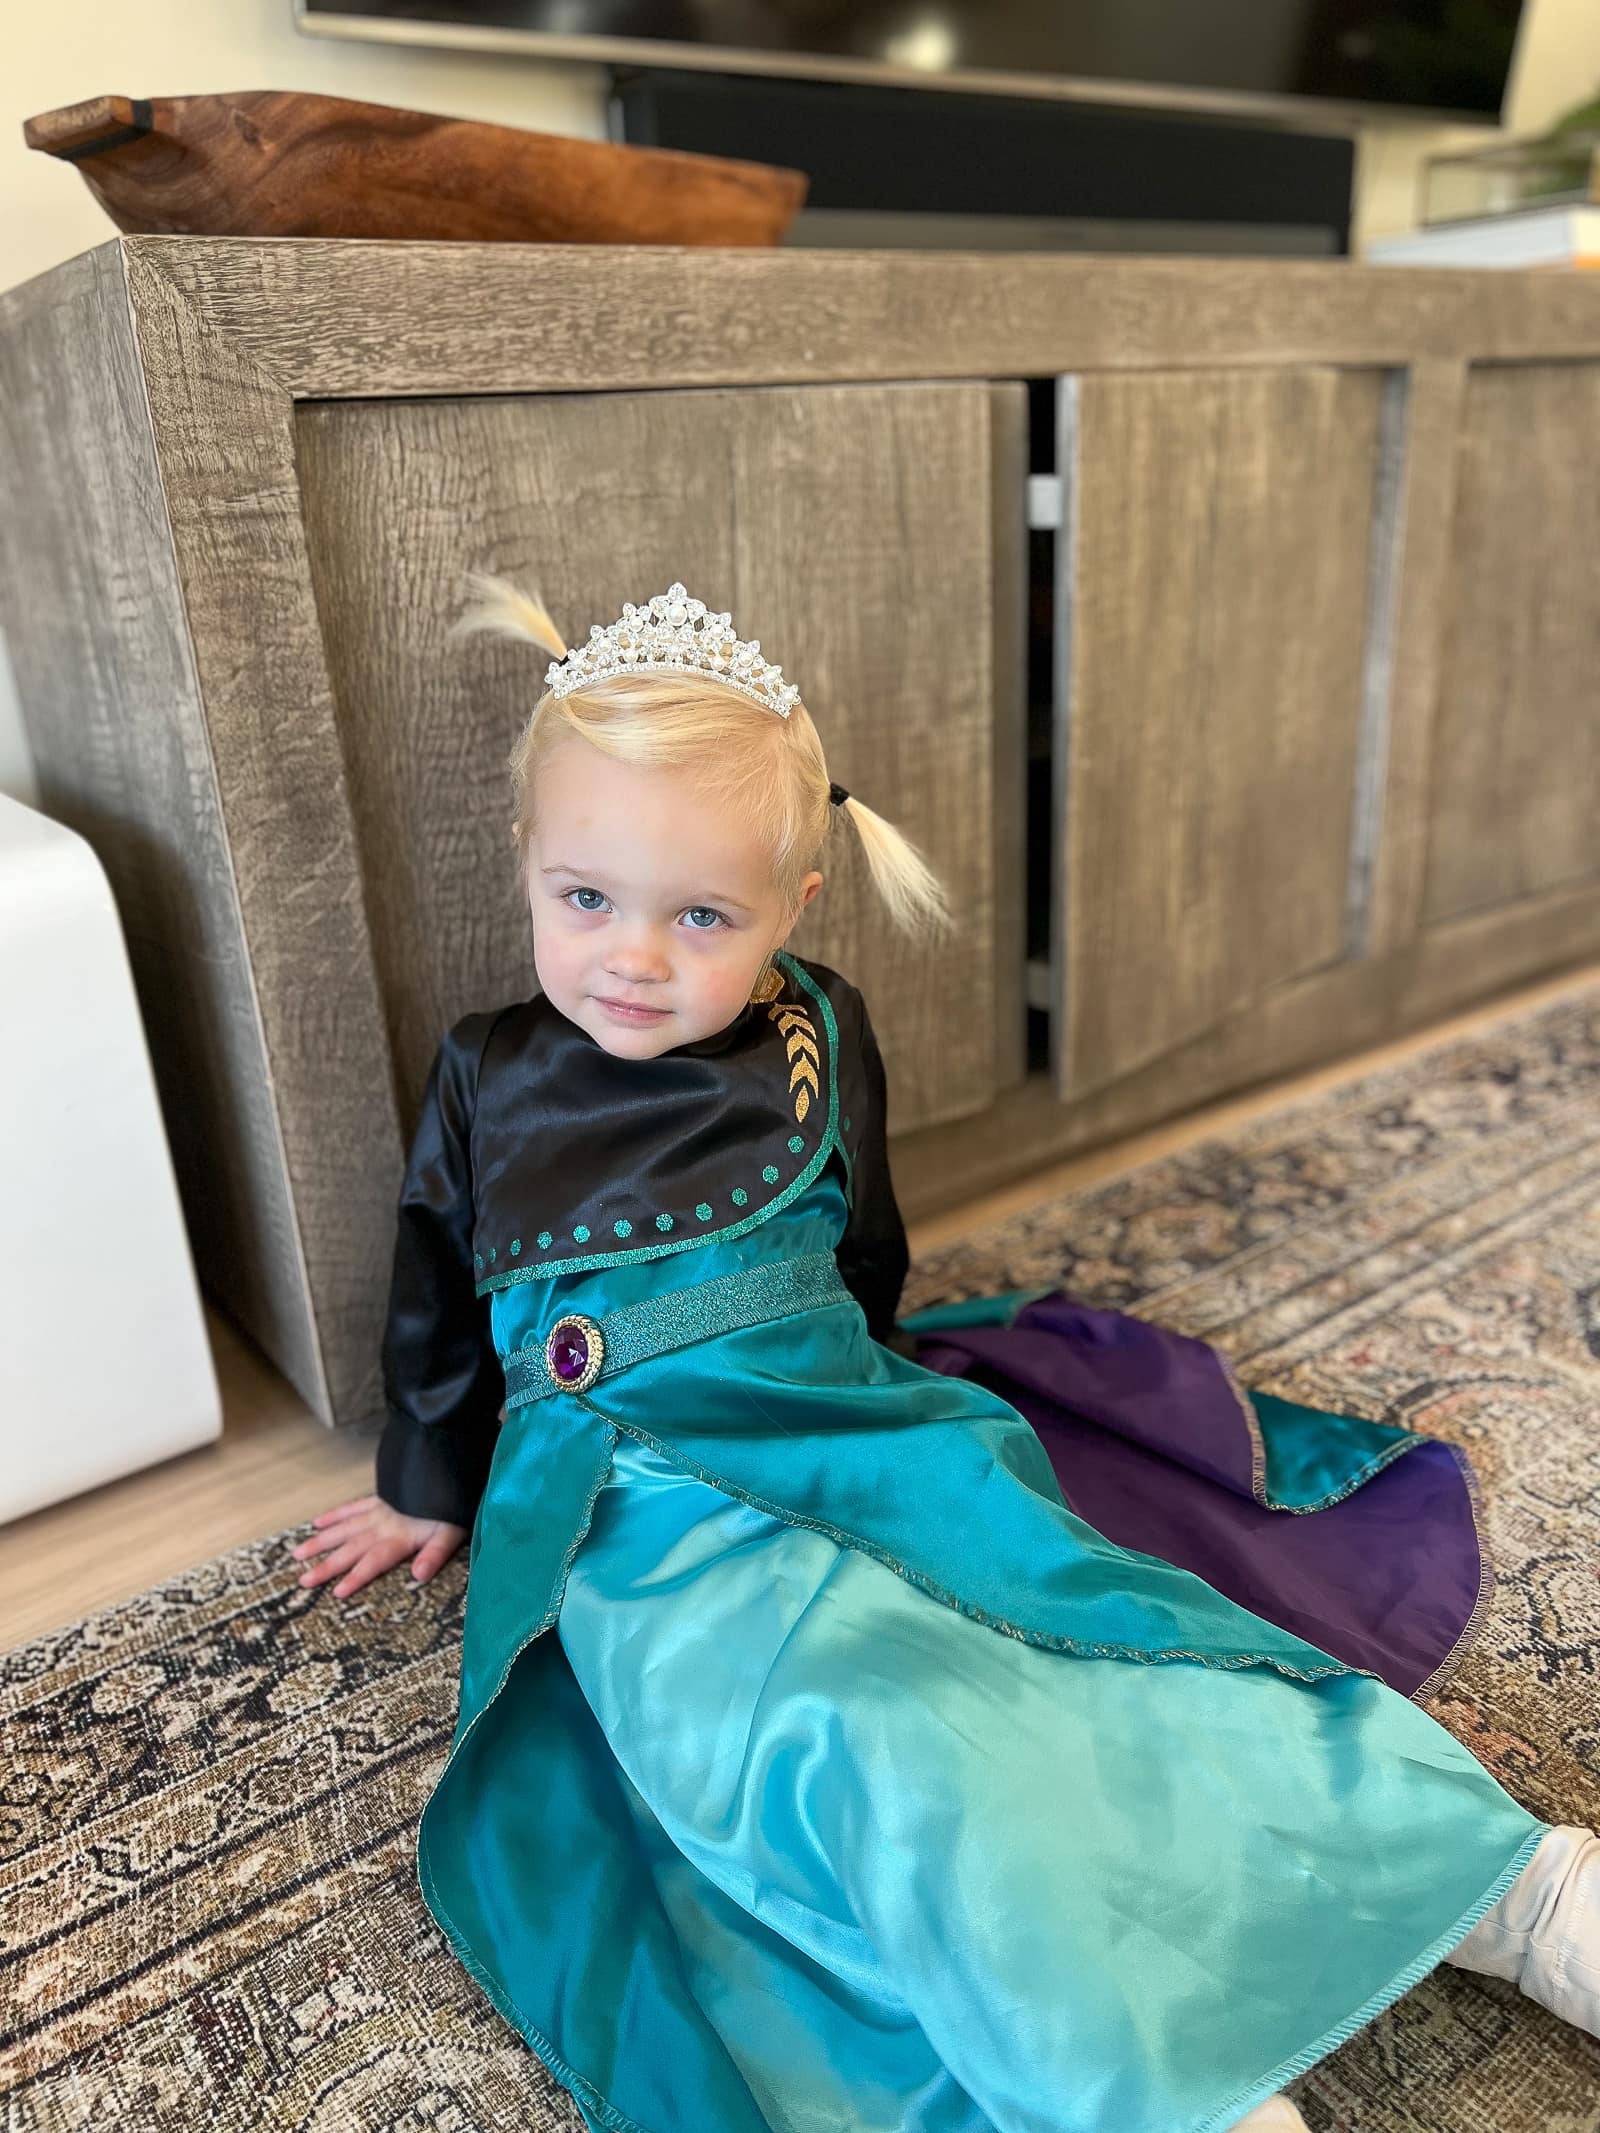 Rory dressed up as Anna from Frozen